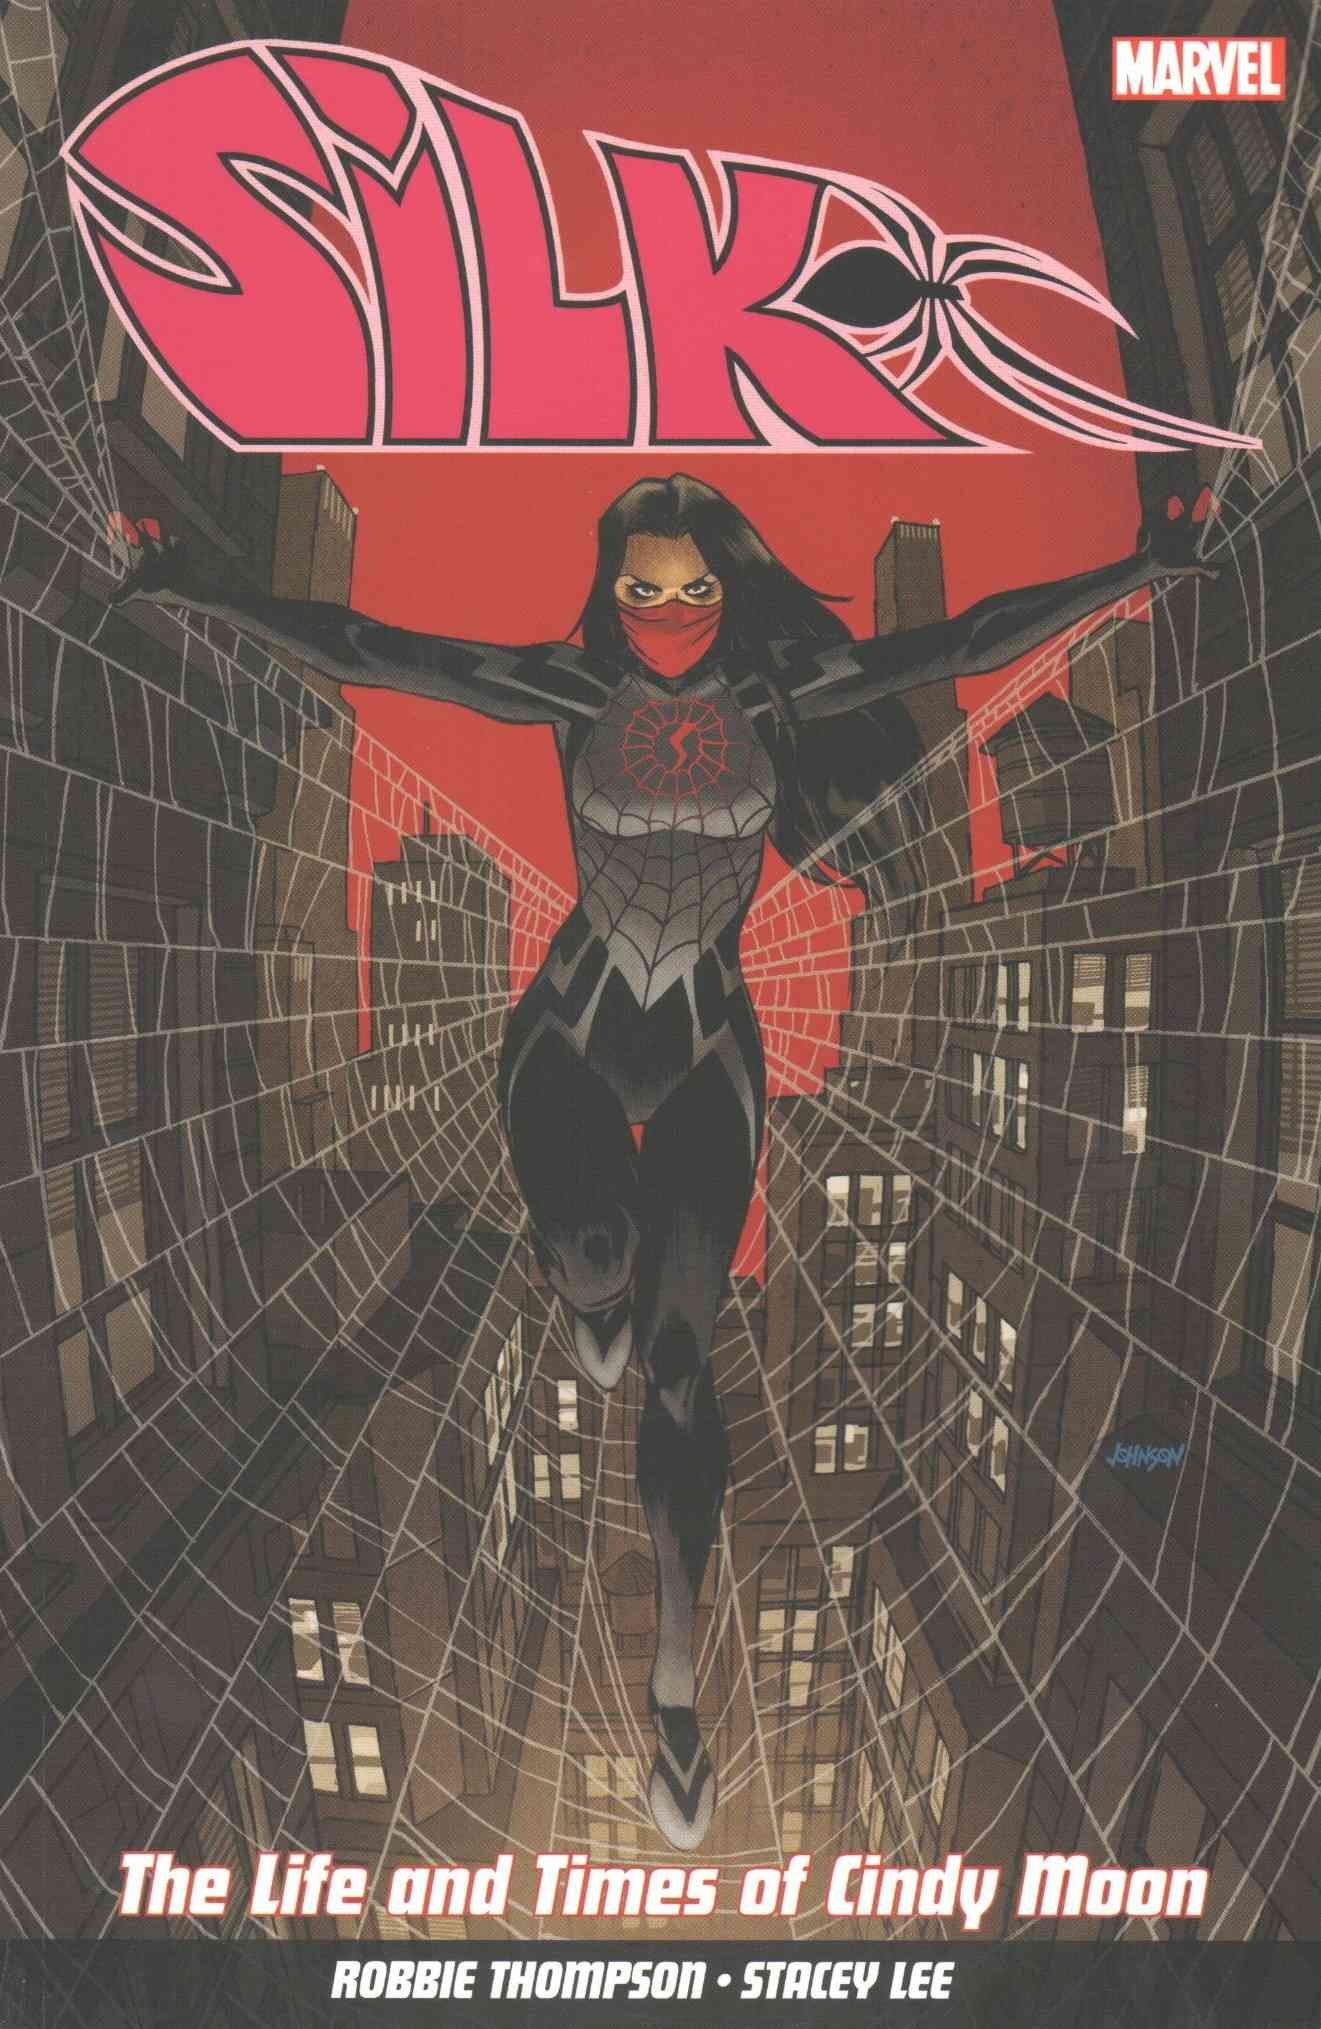 Buy Silk Vol. 0: The Life And Times Of Cindy Moon by Robbie Thompson With  Free Delivery